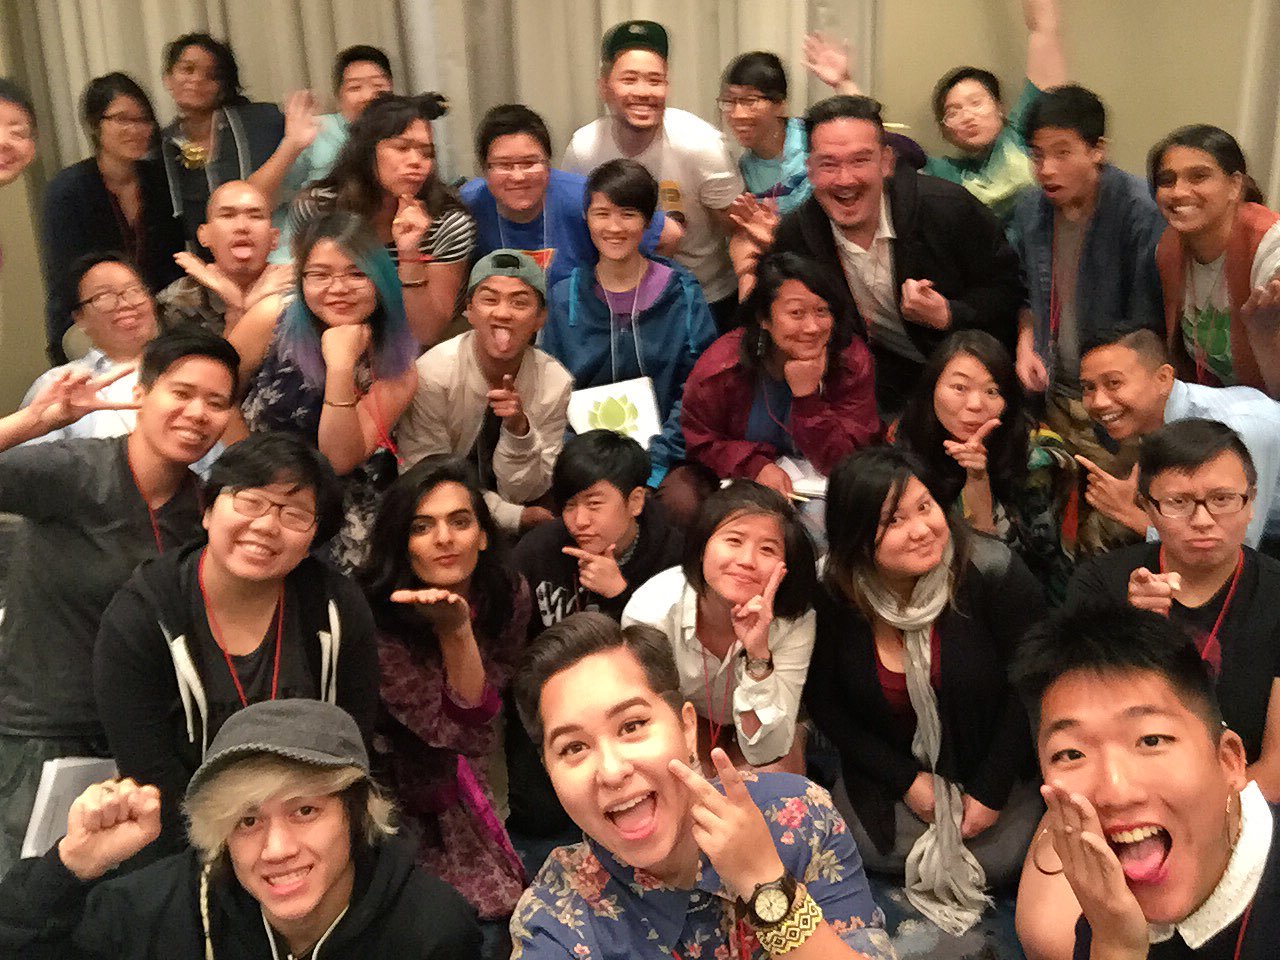 Image Description: A large group selfie from the NQAPIA Leadership Summit. 30 people strike a pose for the photo.